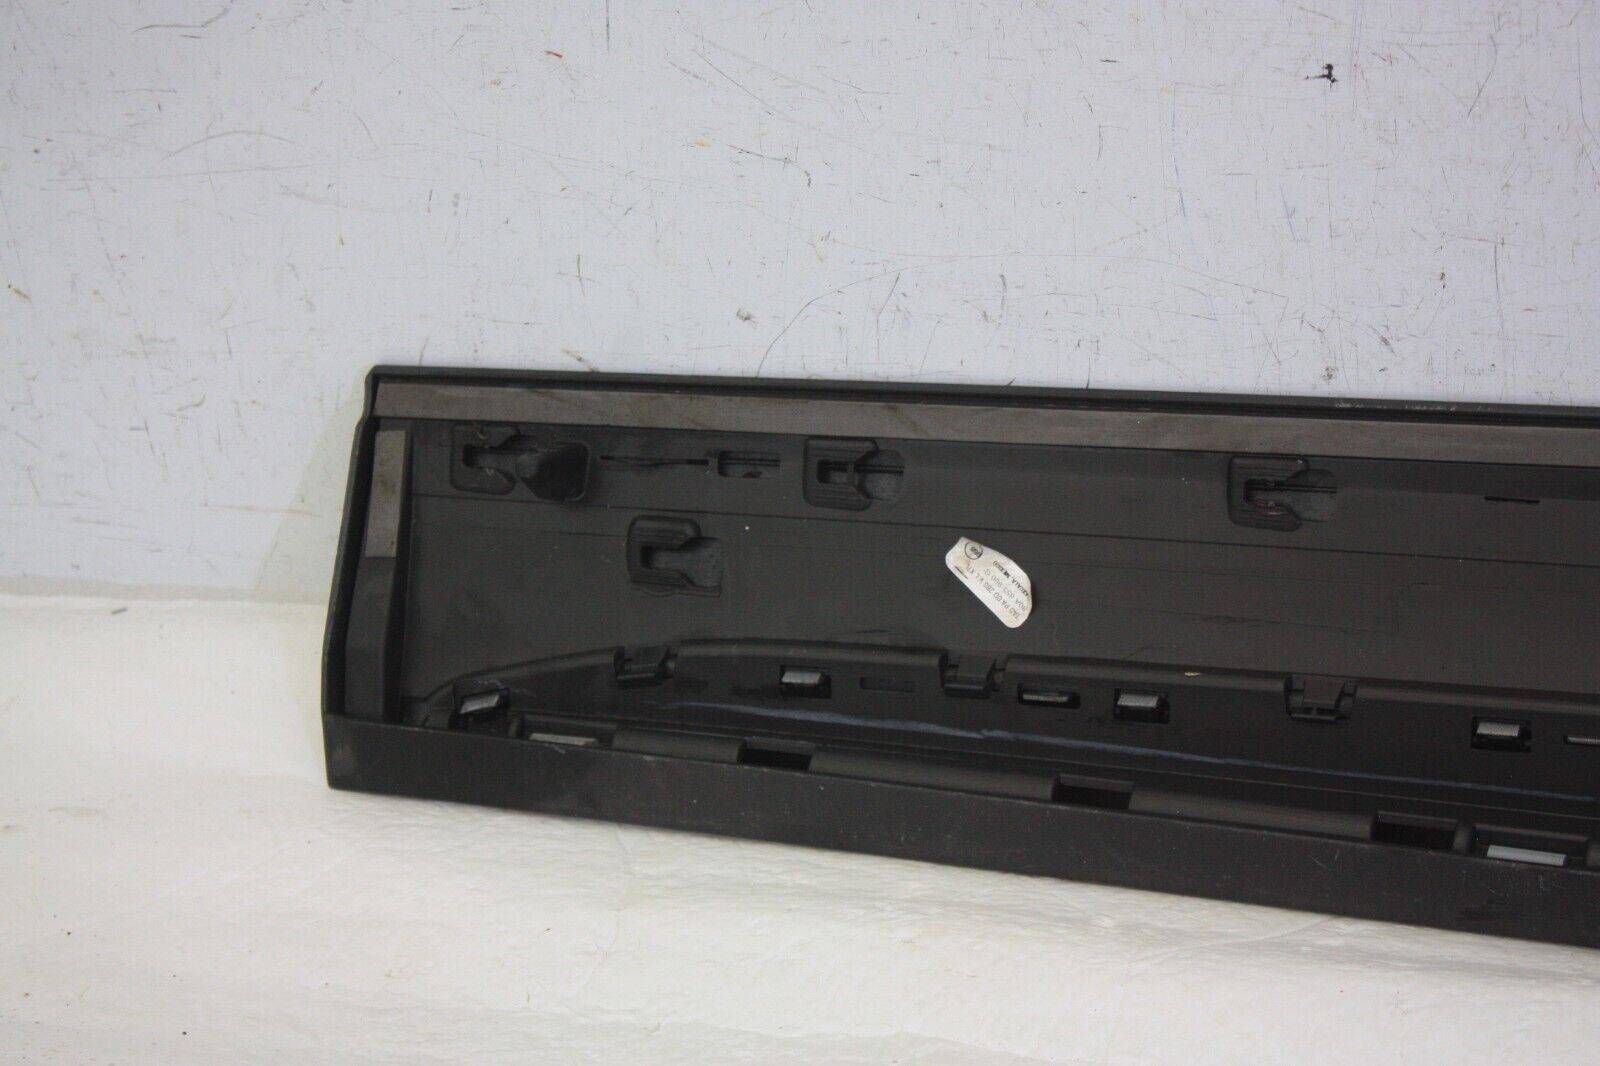 Audi-Q5-Front-Right-Door-Moulding-2017-TO-2020-80A853960-Genuine-NON-S-LINE-176283428719-13